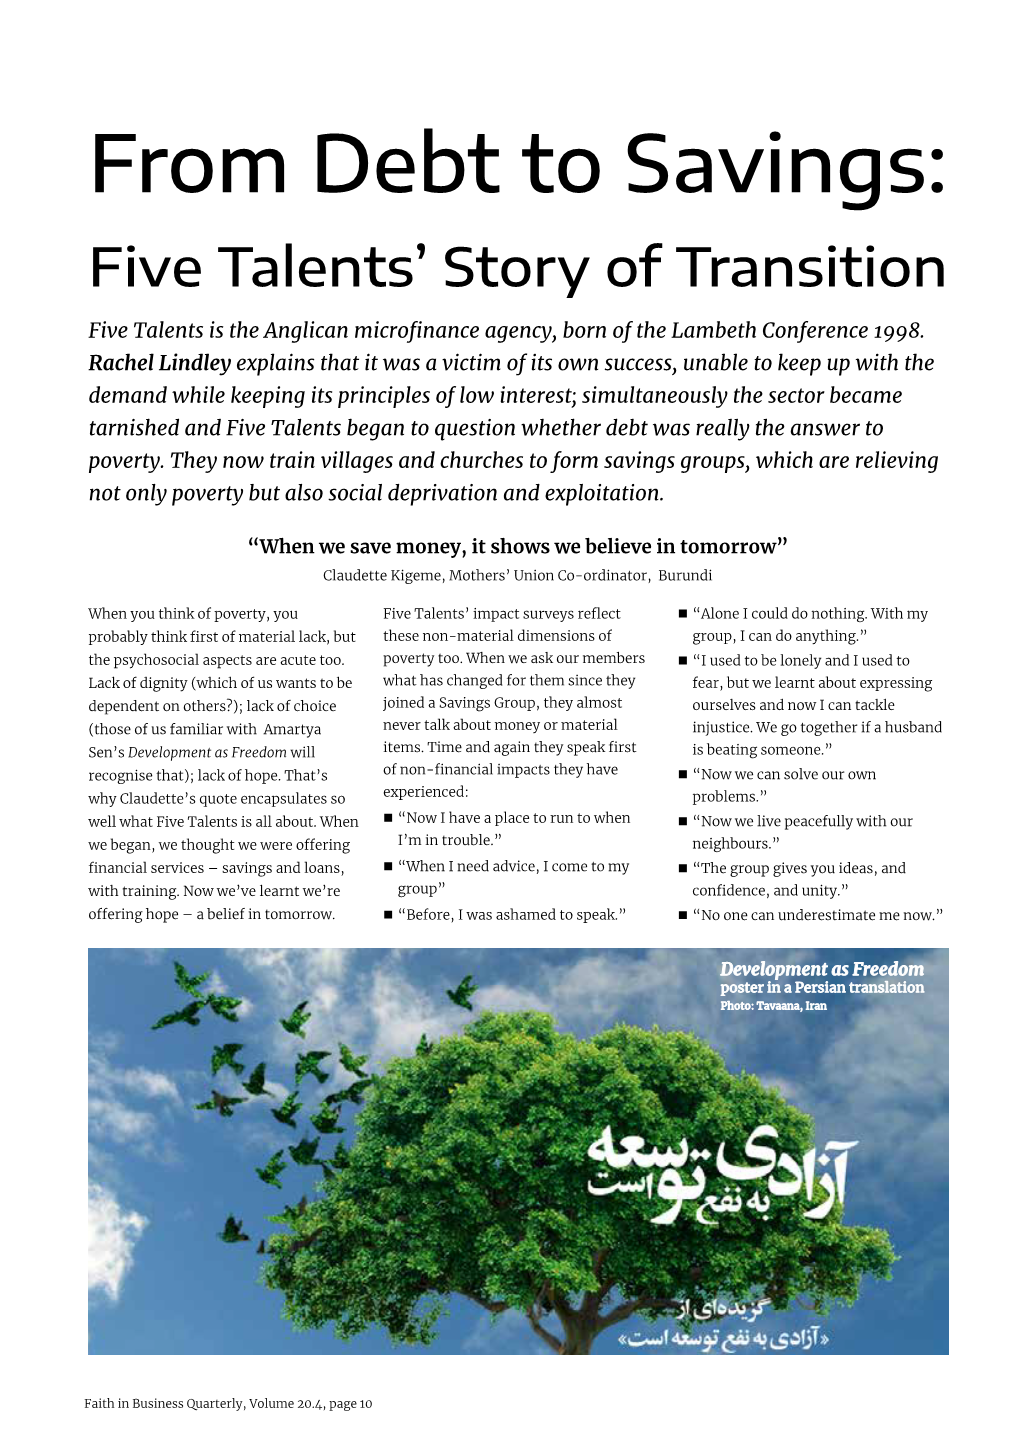 From Debt to Savings: Five Talents’ Story of Transition